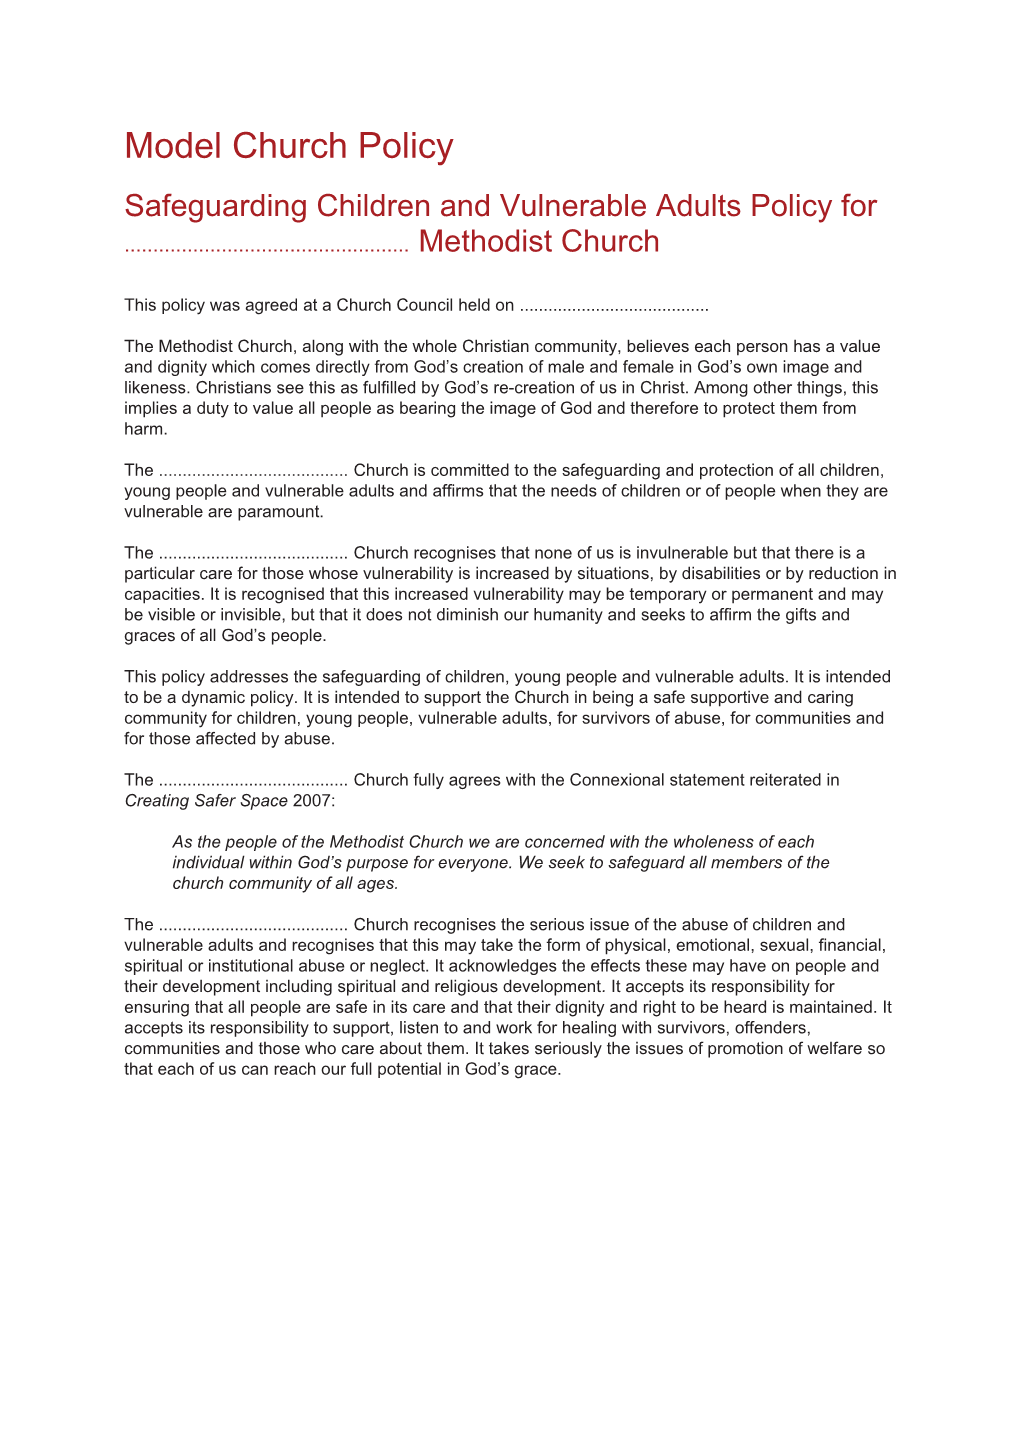 Safeguarding Children and Vulnerable Adults Policy for Methodist Church